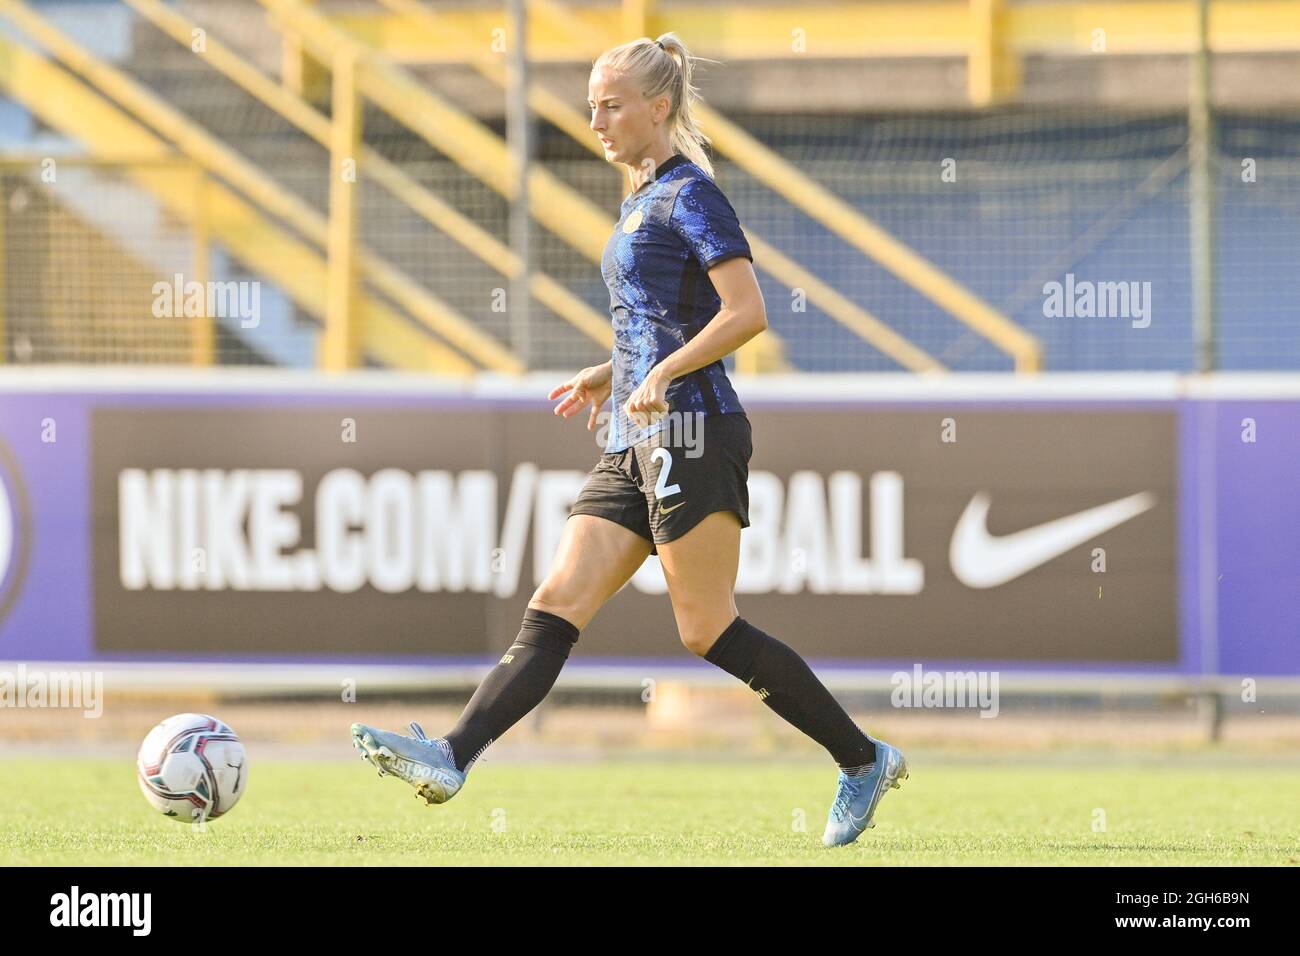 Sesto San Giovanni, Italy. 05th Sep, 2021. Anja Sonstevold (#2 Inter)  during the Serie A womens match between FC Internazionale and SS Lazio at  Breda Stadium in Sesto San Giovanni Milan, Italy